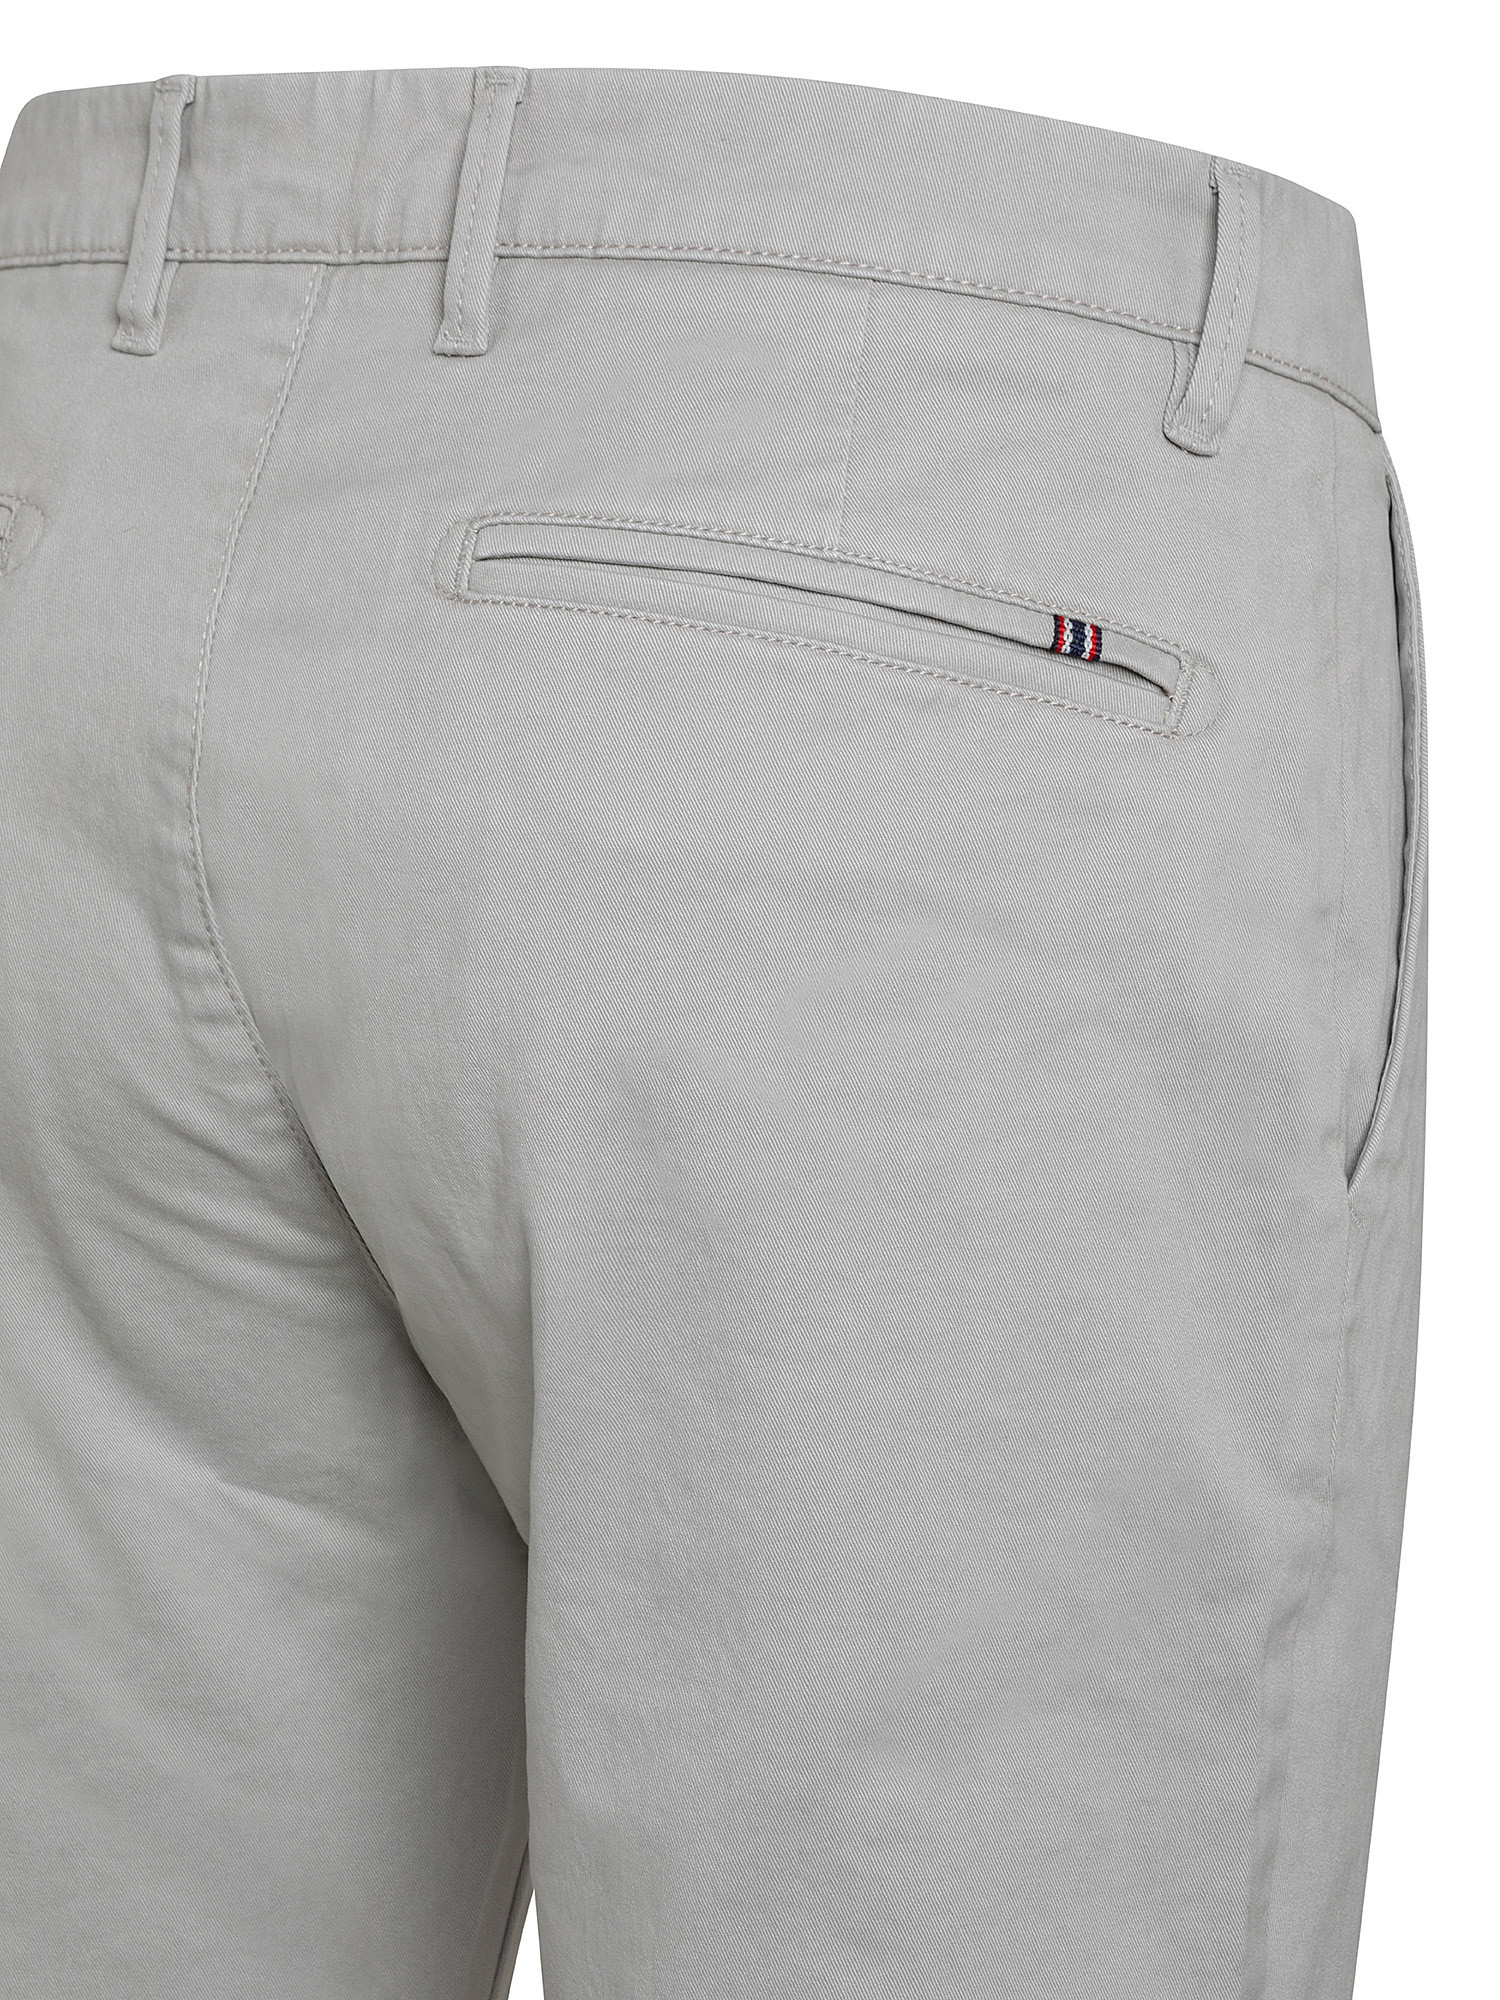 Stretch cotton chinos trousers, Pearl Grey, large image number 2